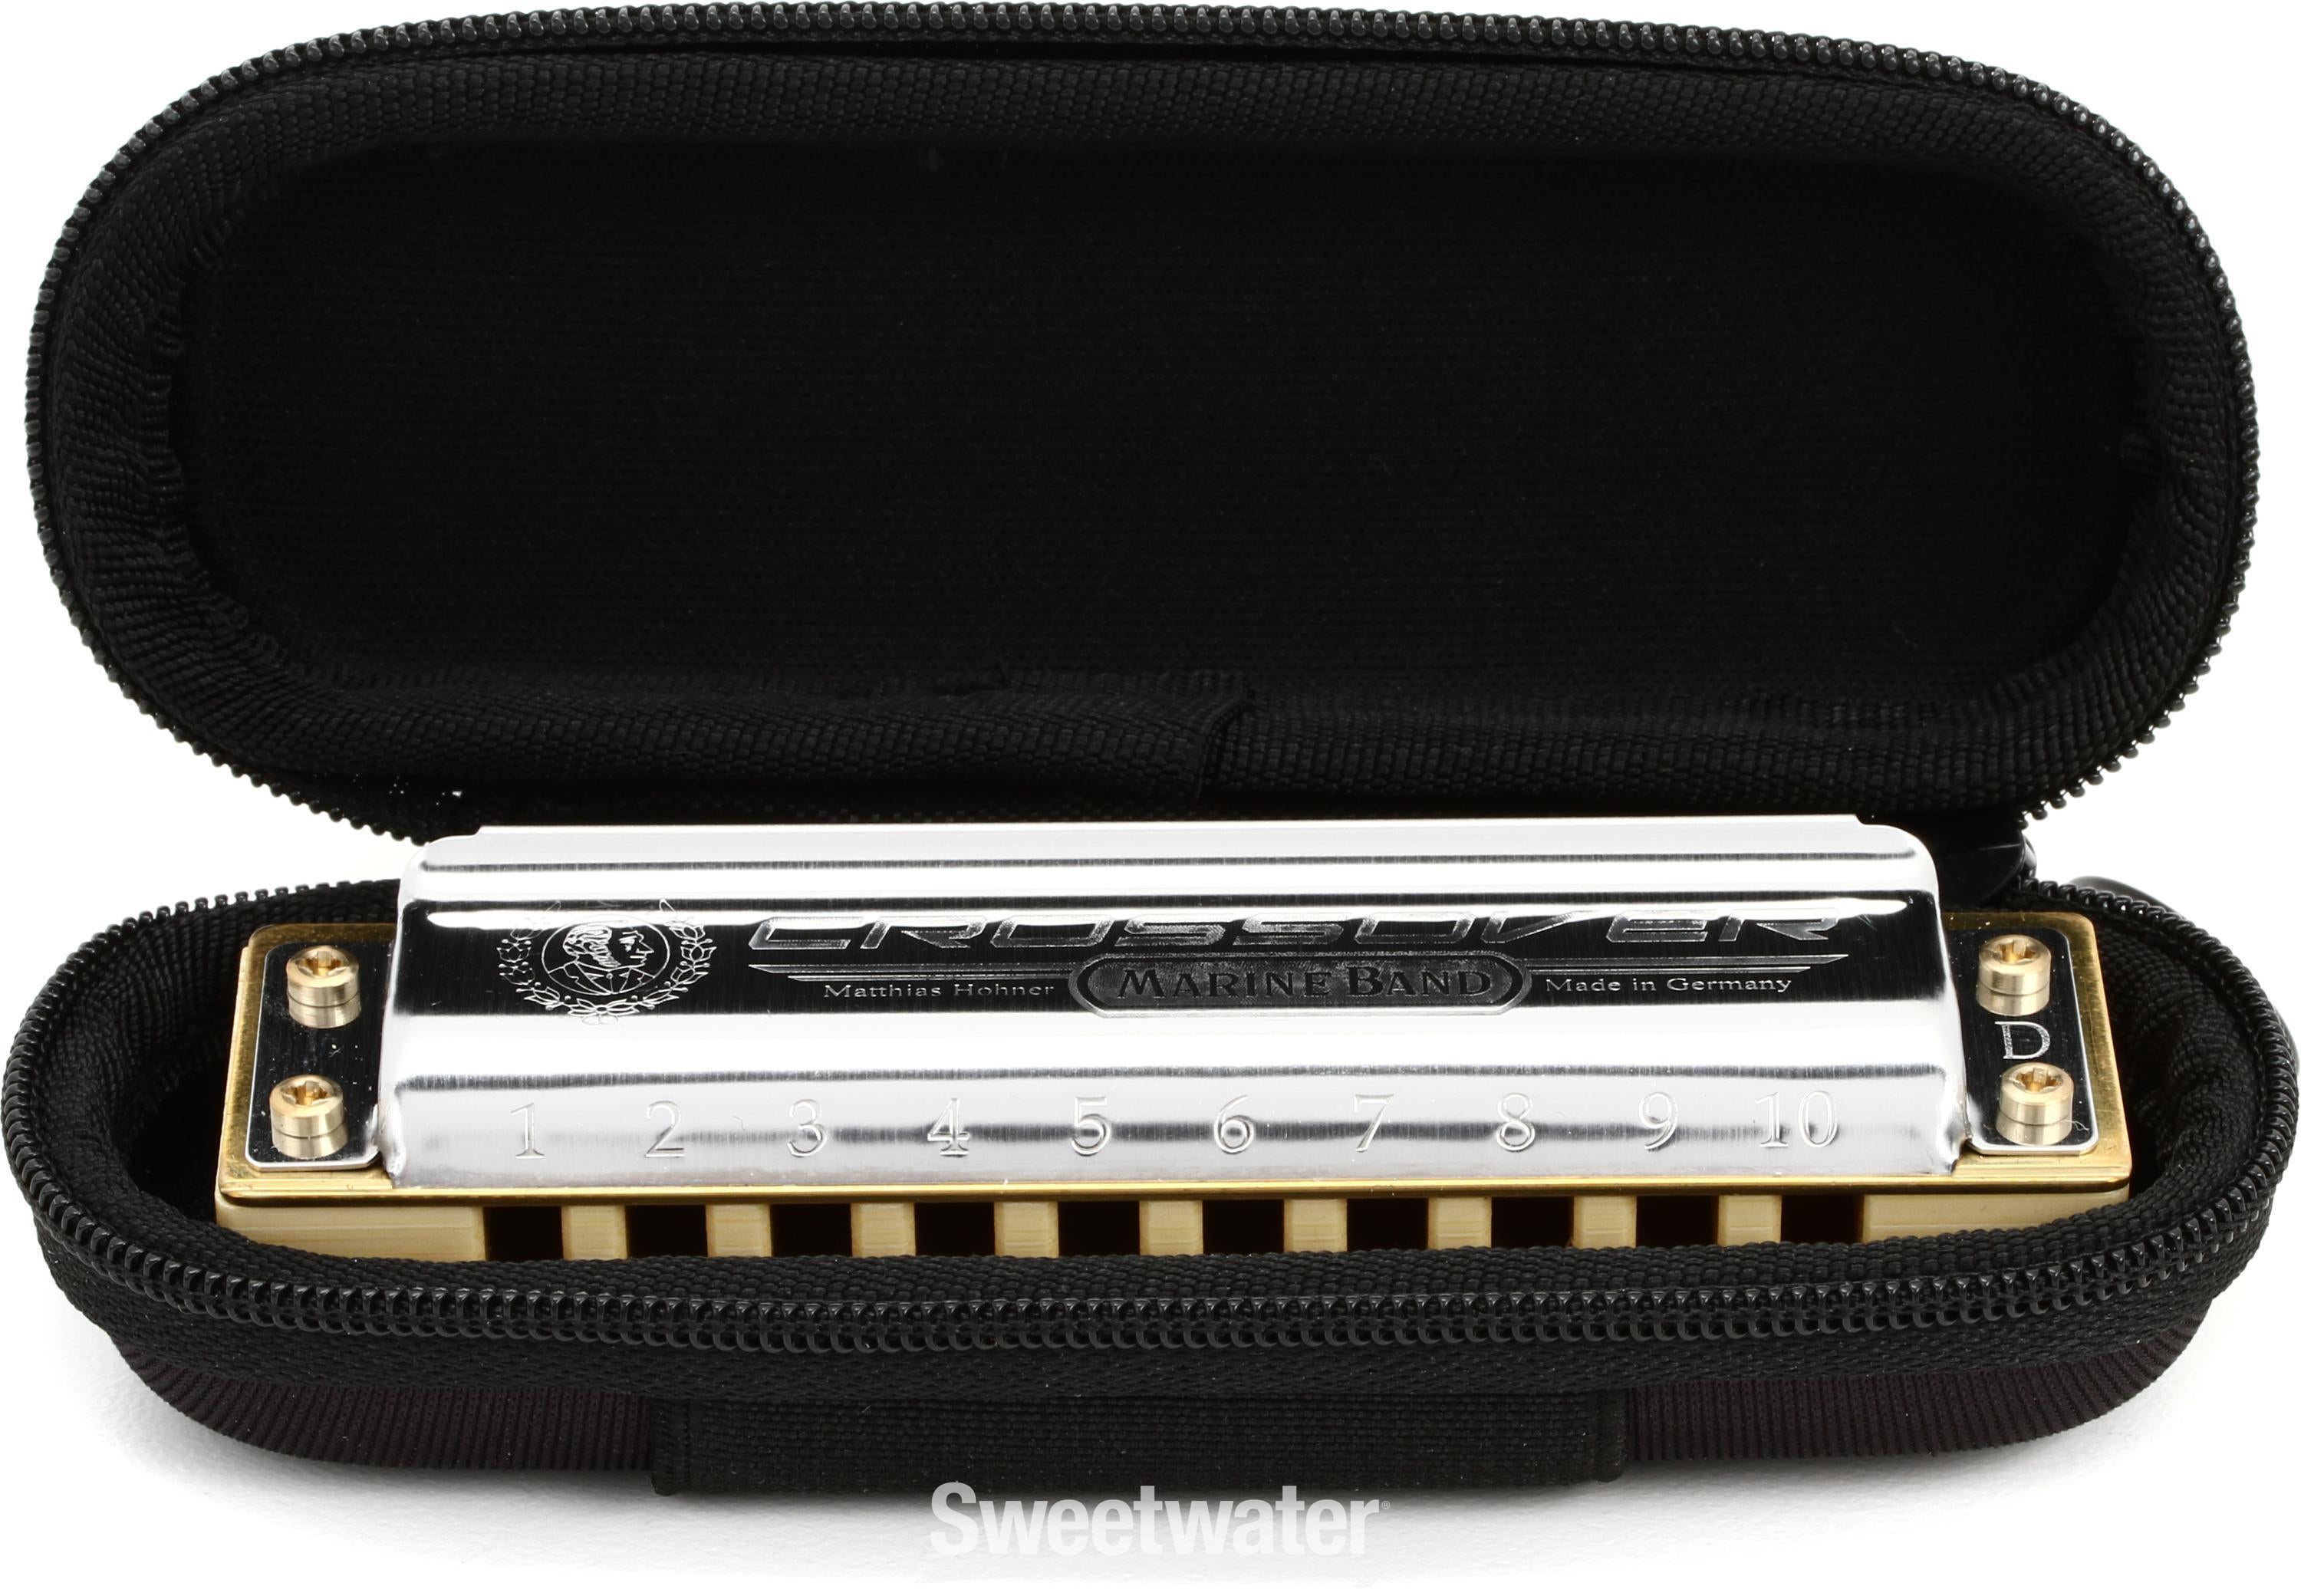 HOHNER Marine Band CROSSOVER Harmonica， Key of D， Made in